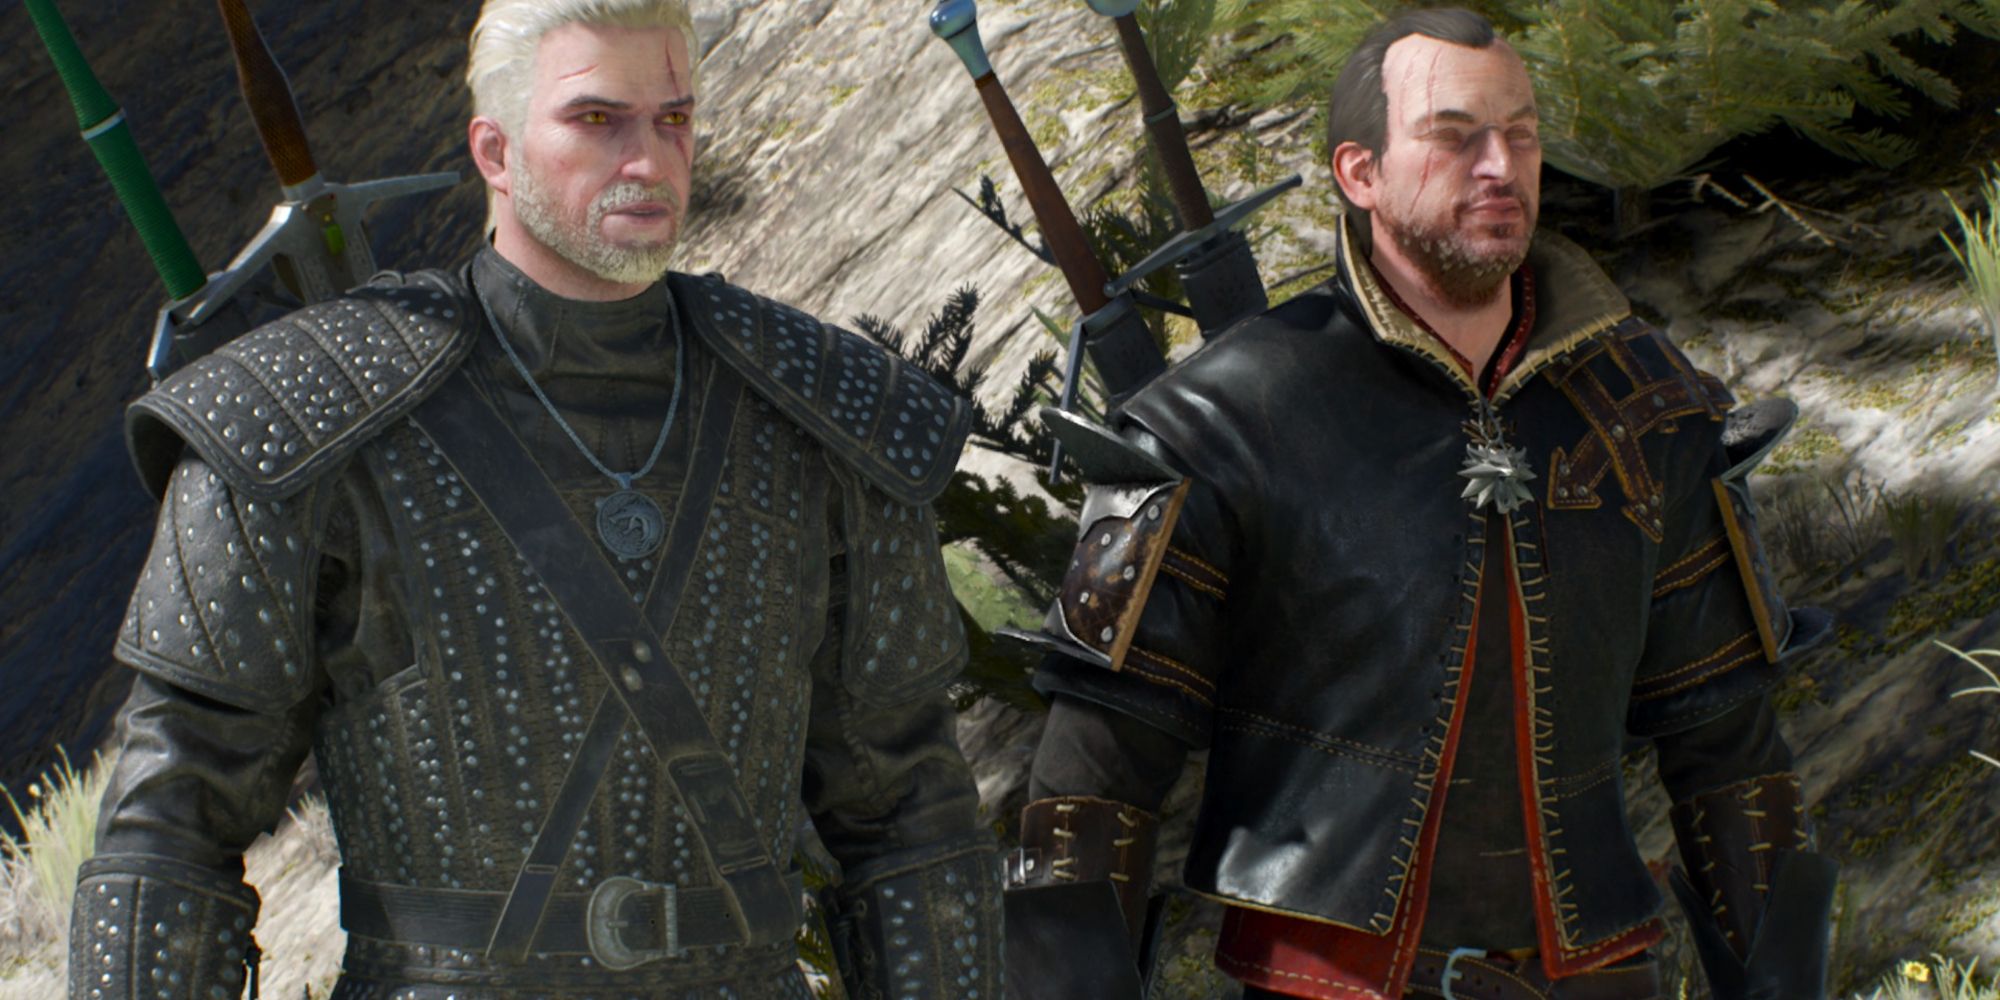 Lambert and Geralt in The Witcher 3, with Geralt wearing Henry Cavill's outfit from Netflix's The Witcher show.